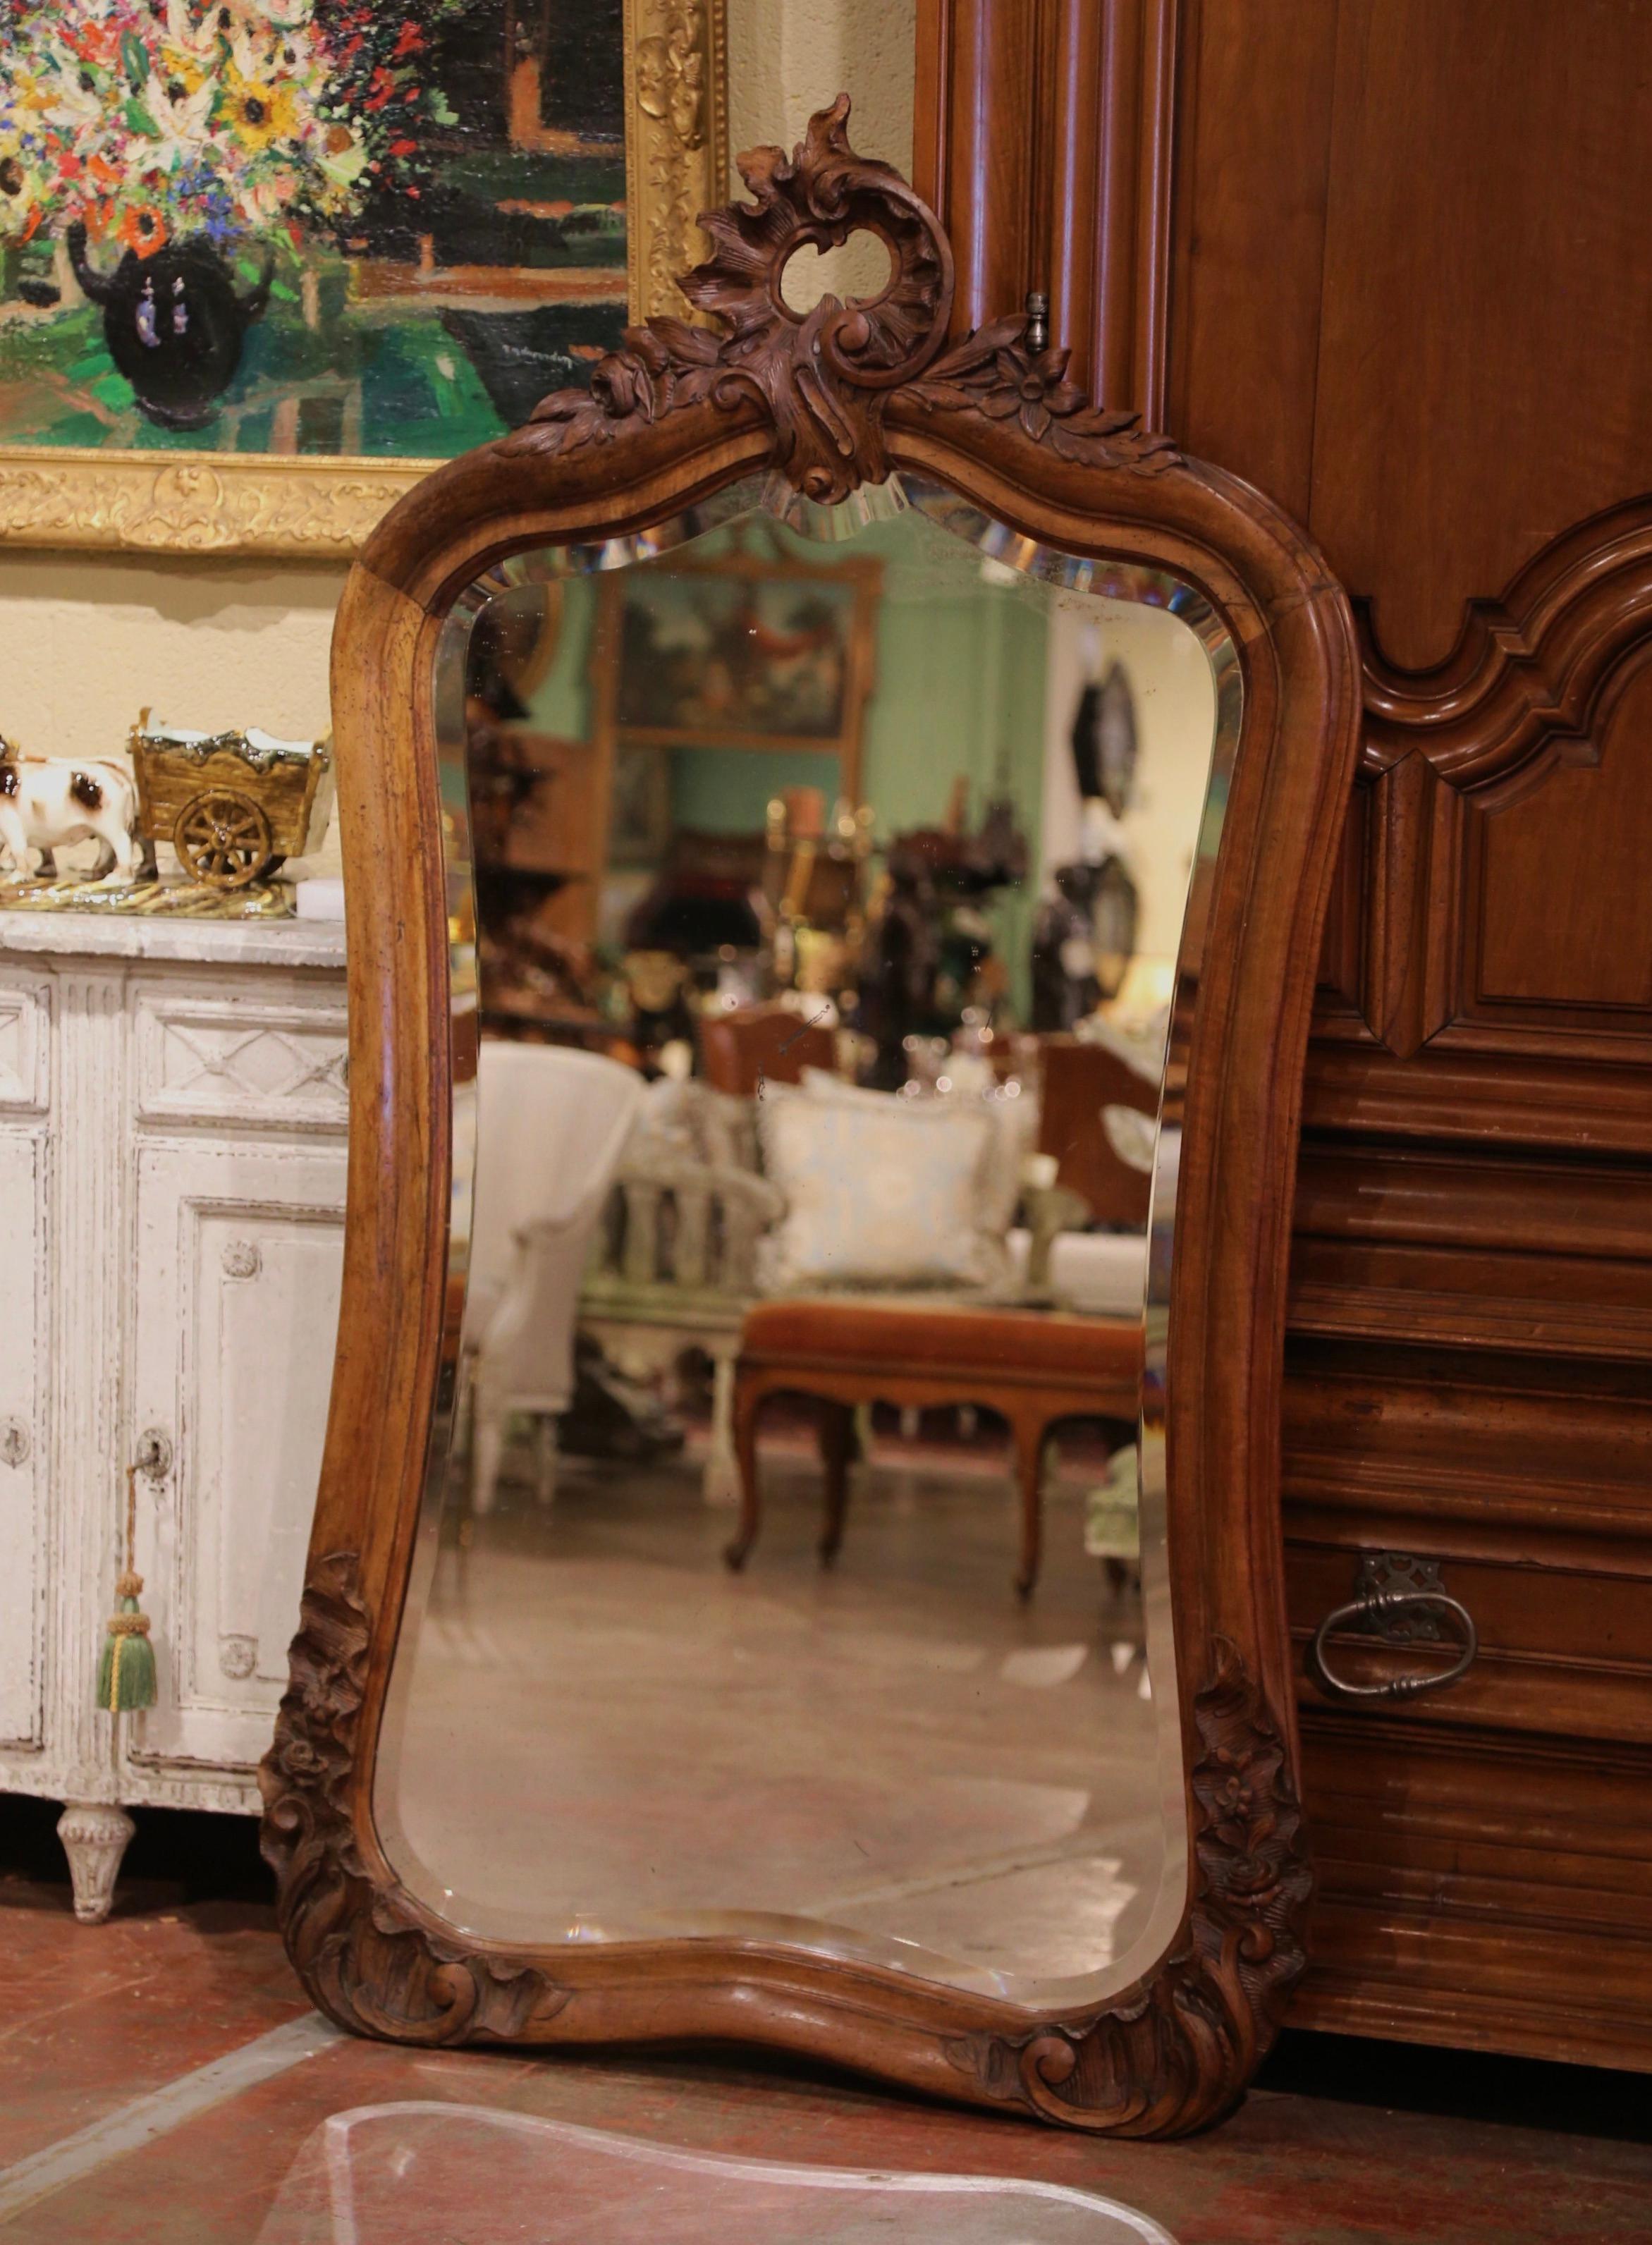 This elegant antique wall mirror was crafted in Southern France, circa 1880. The rectangular mirror with curved sides and bottom, features a nicely carved pierced shell cartouche at the pediment with delicate scroll, leaf and floral motifs. Both